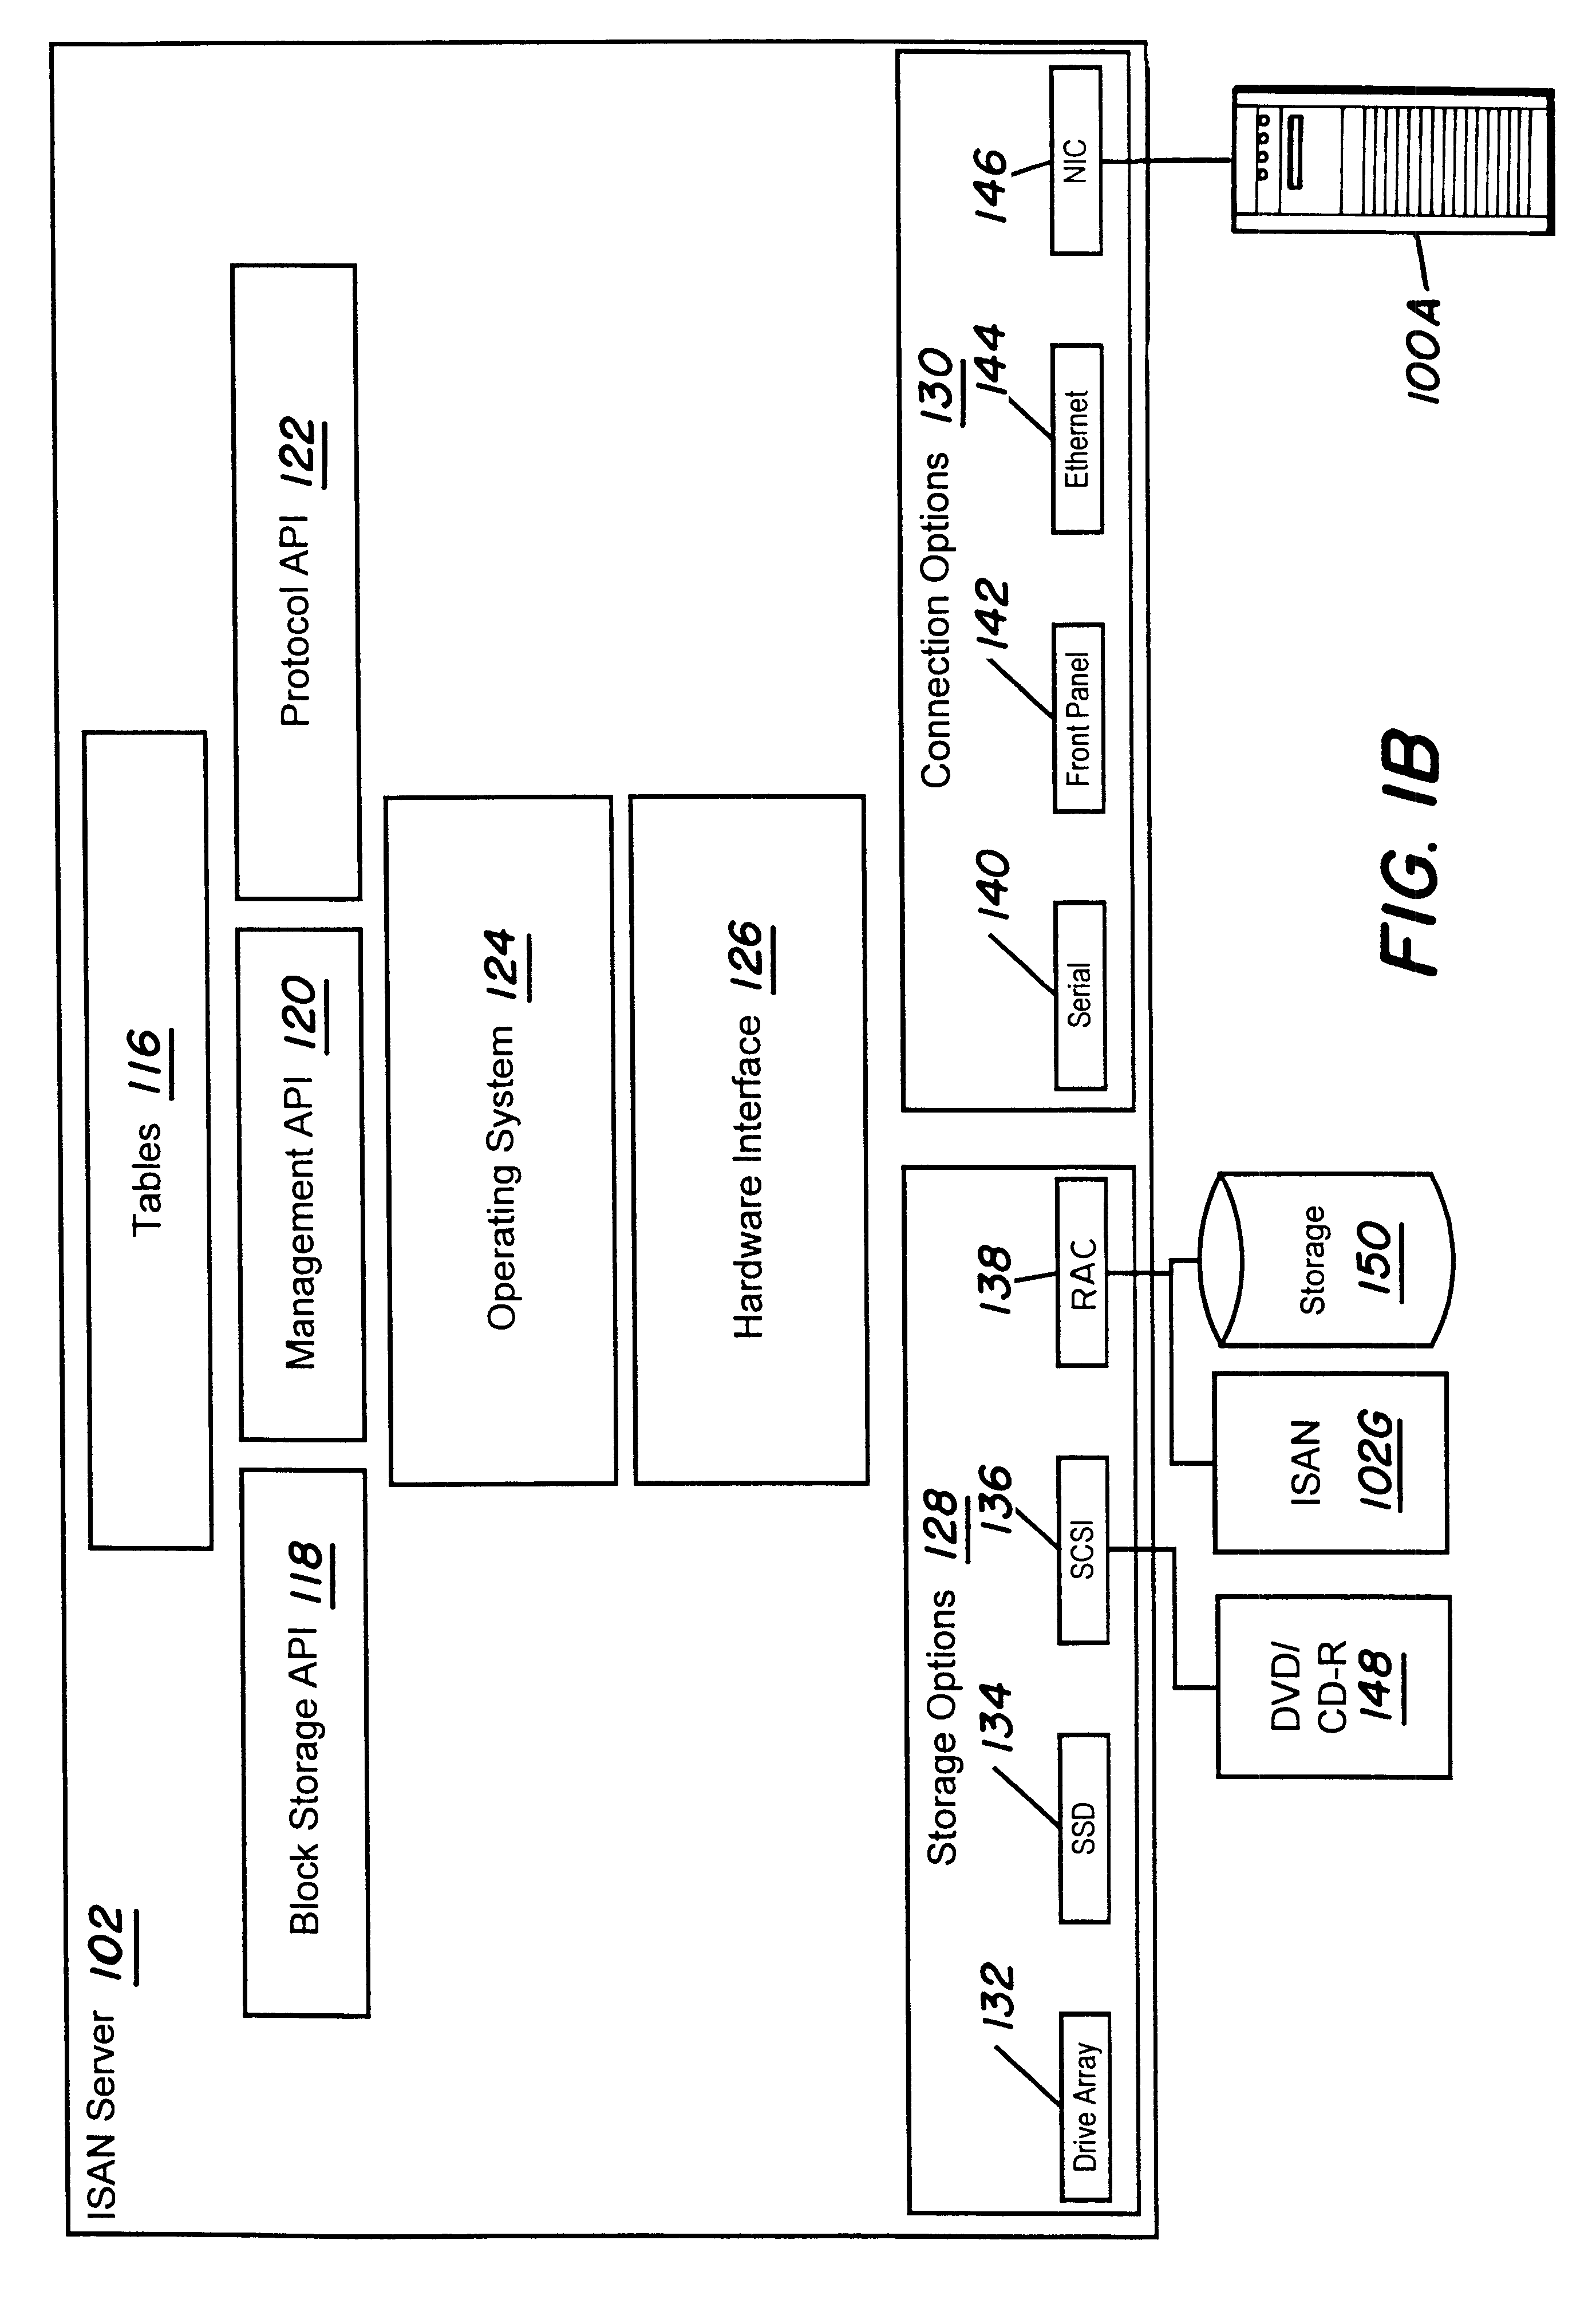 Storage server system including ranking of data source